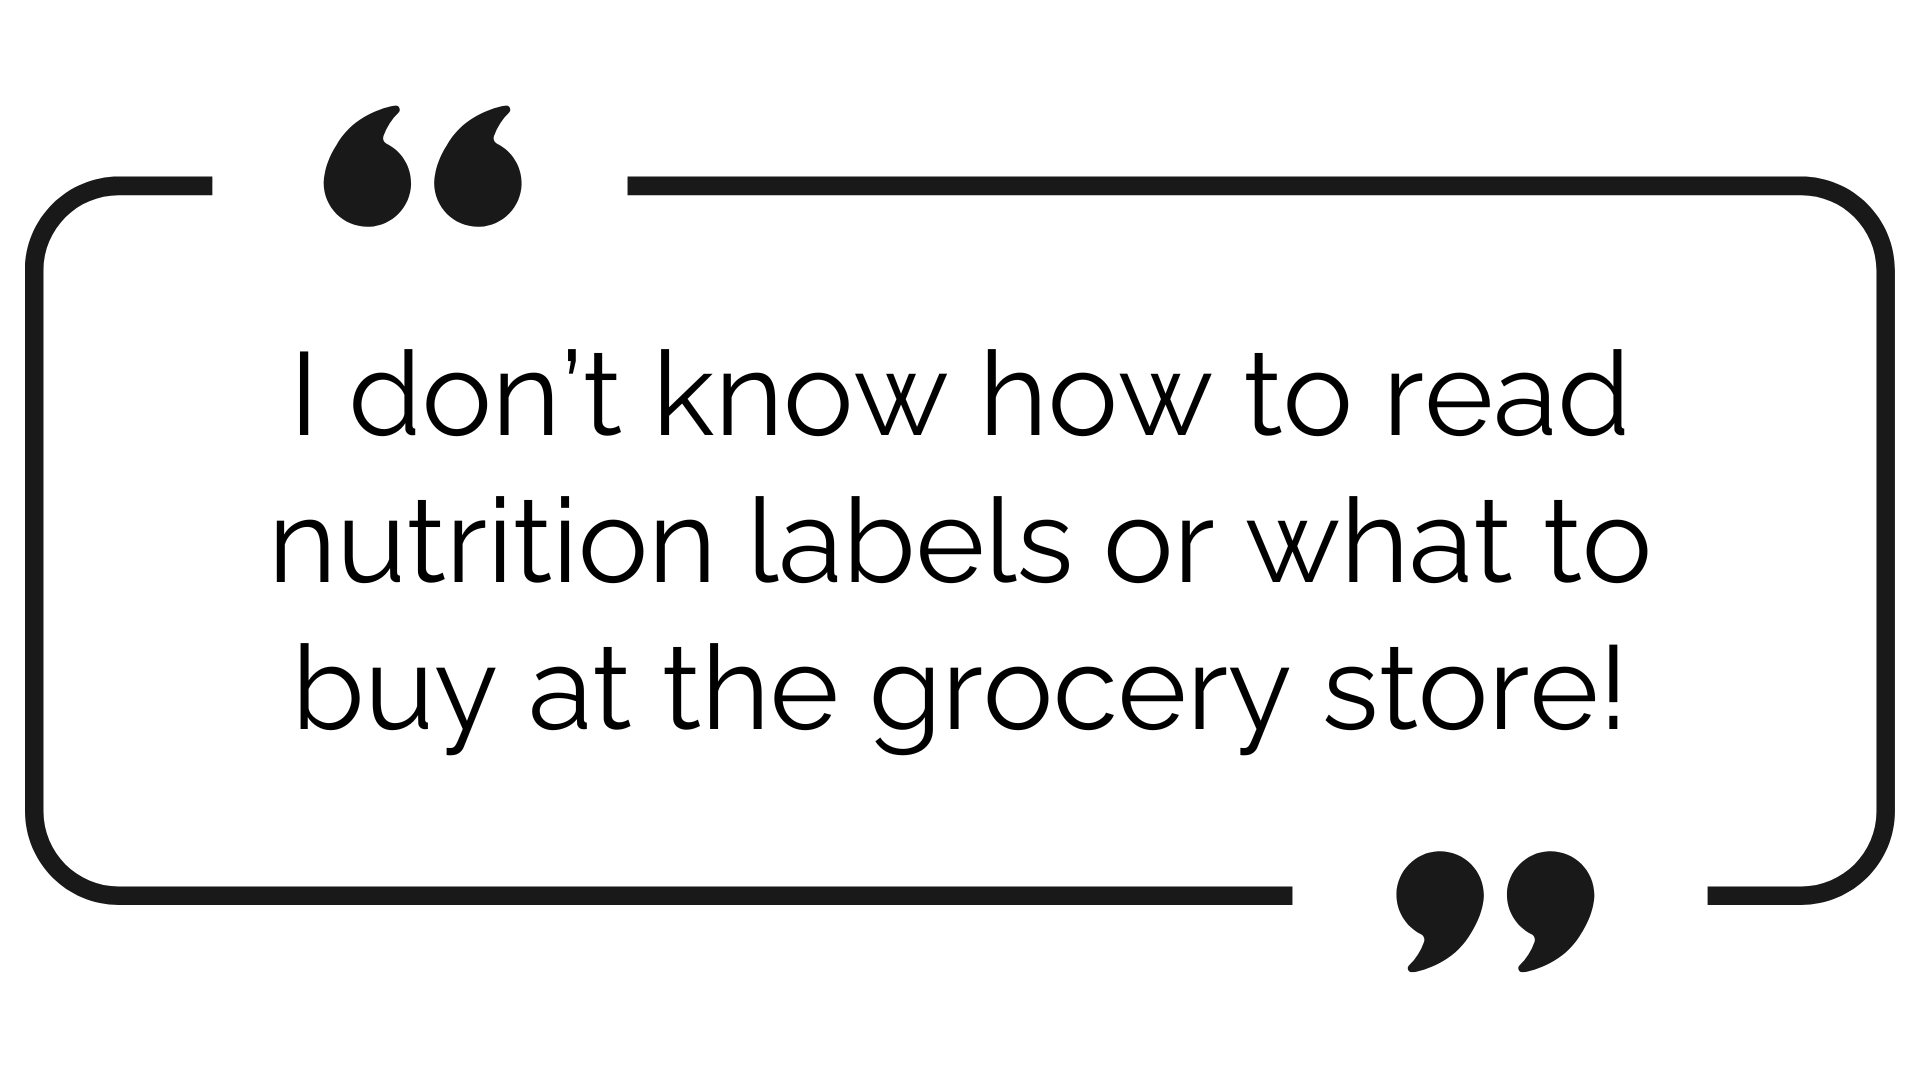 I don’t know how to read nutrition labels or what to buy at the grocery store! 